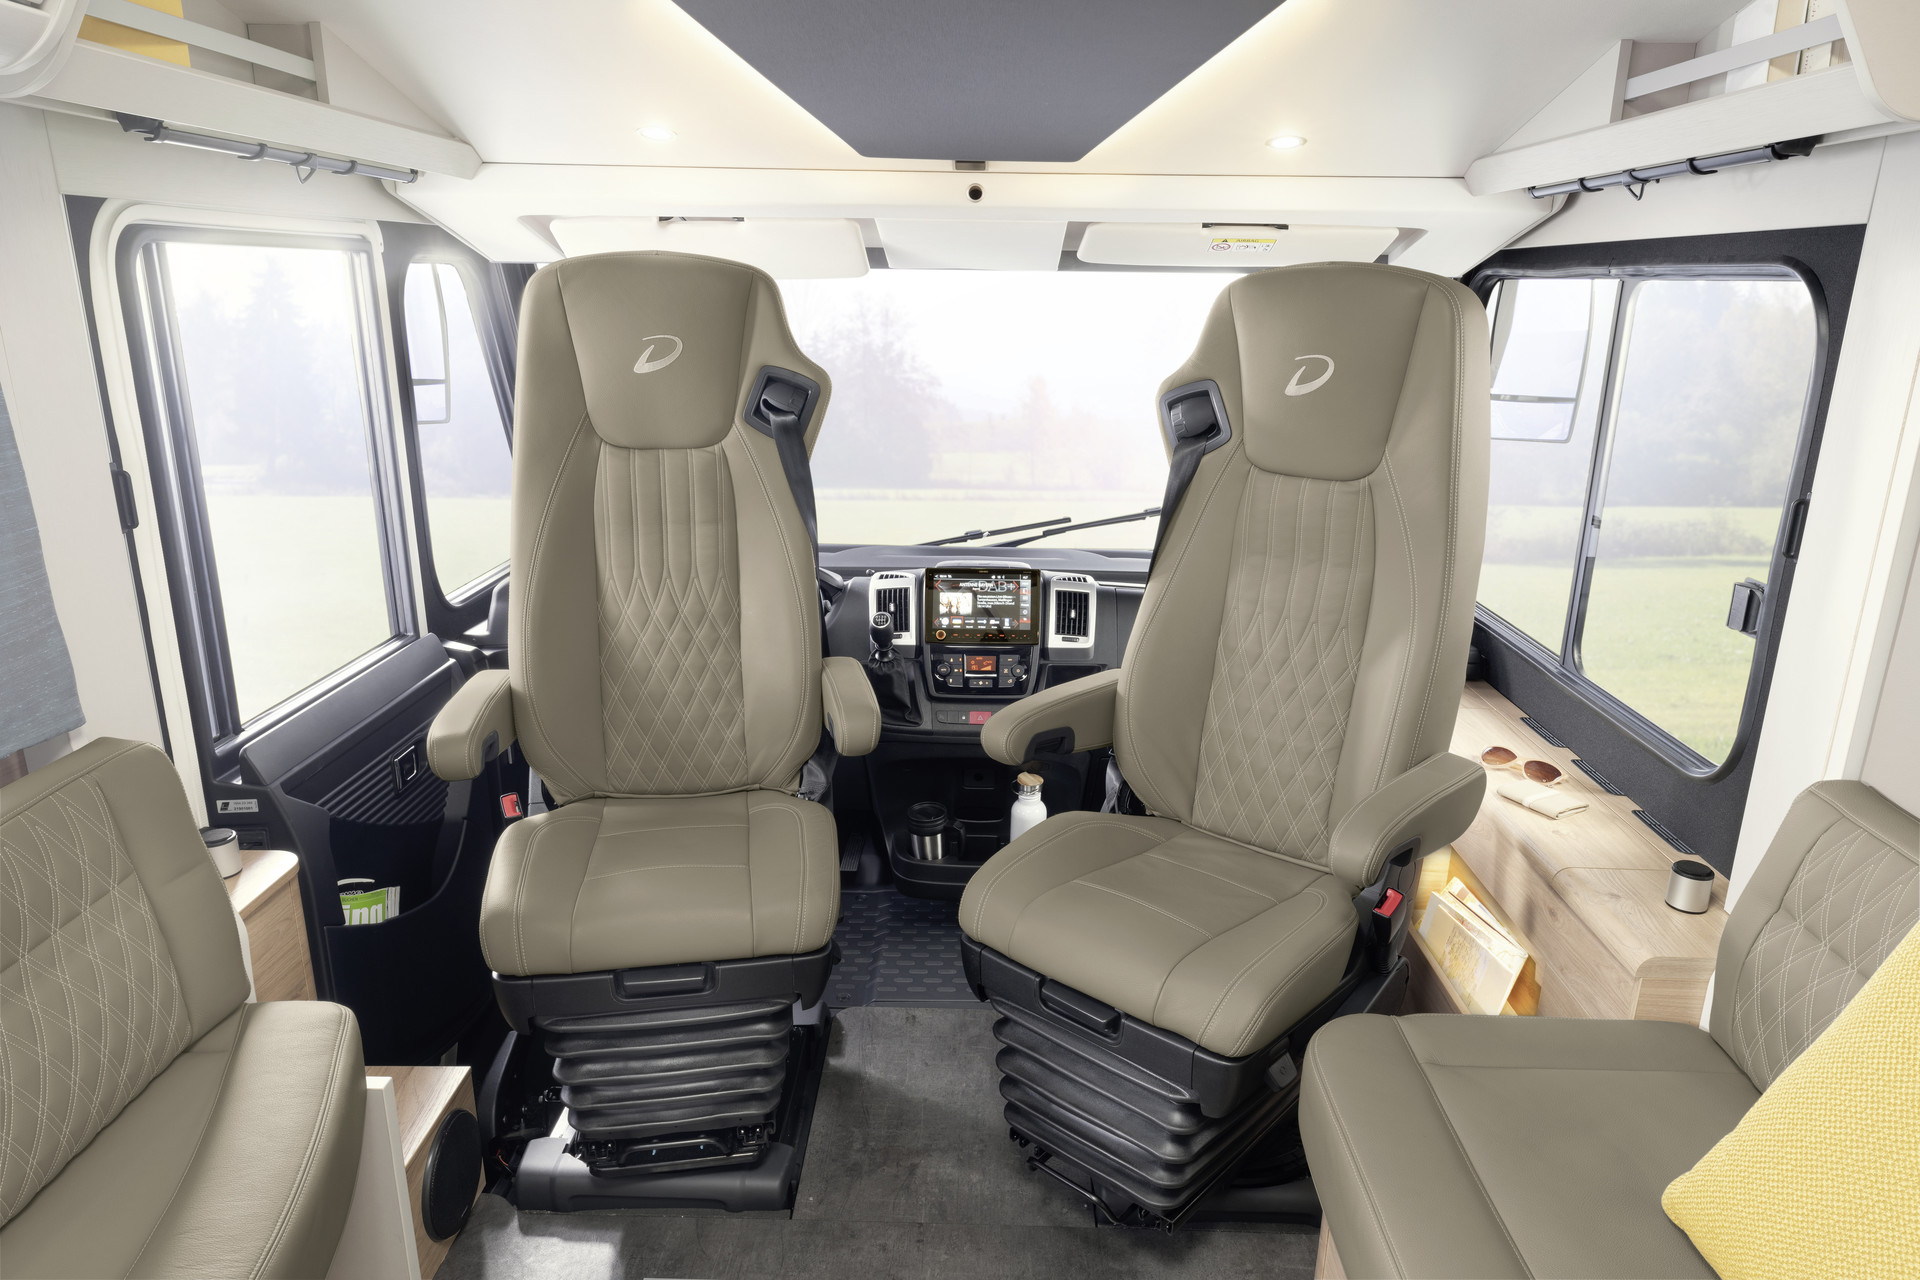 High-quality SKA captain seats are fitted as standard. As an option, hydraulic seats can be selected – to completely eliminate vibrations and bumps from the road surface. They can also be combined with seat heating and ventilation